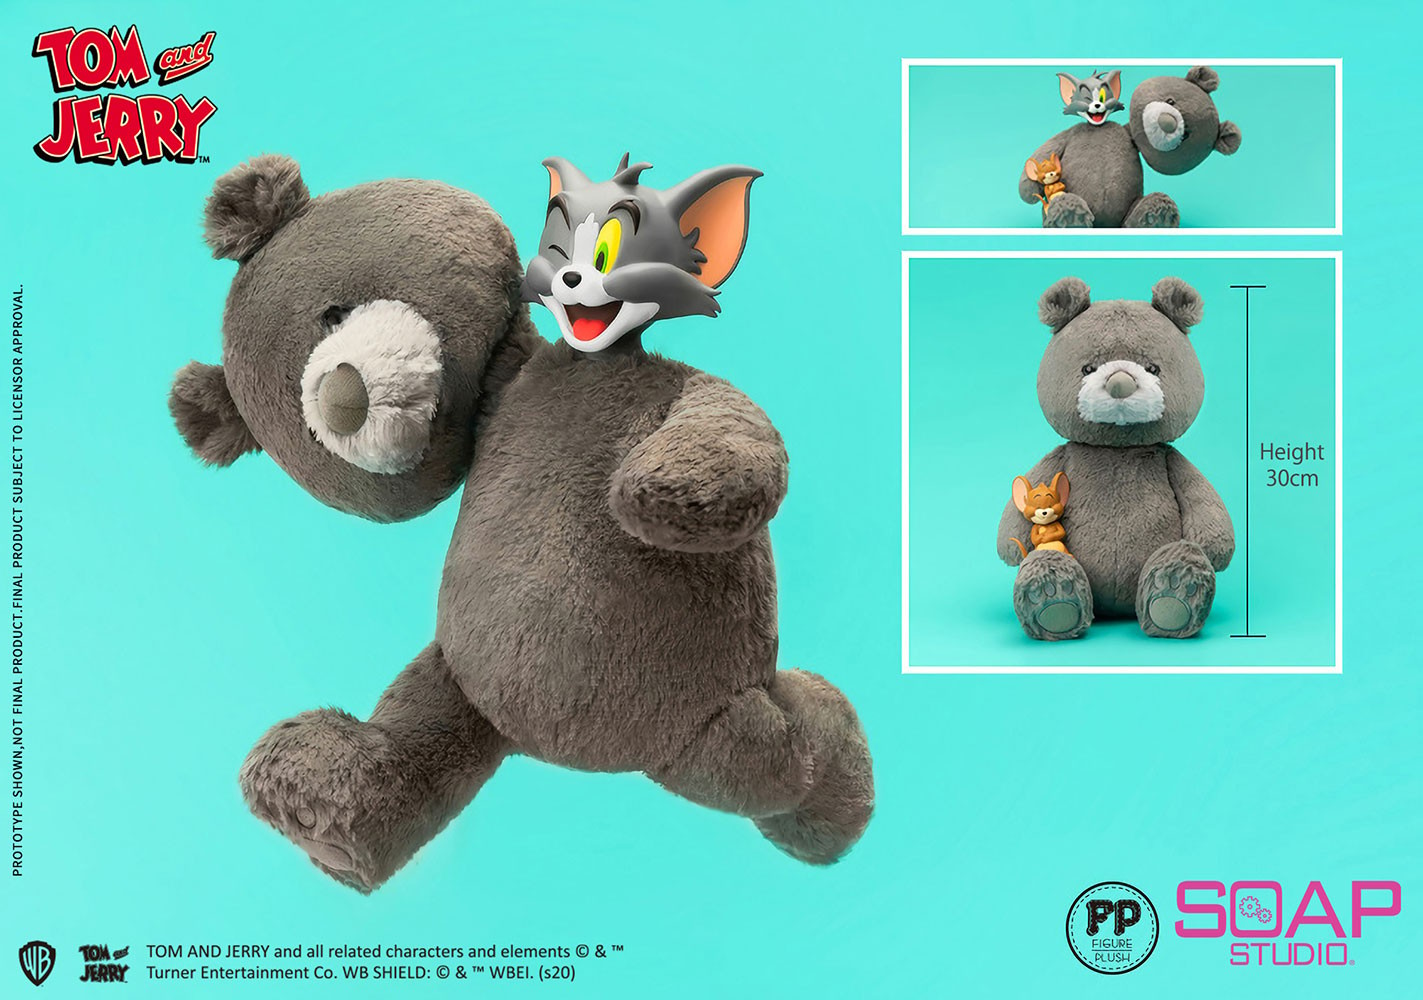 Tom and Jerry Plush Teddy Bear (Charcoal Gray)- Prototype Shown